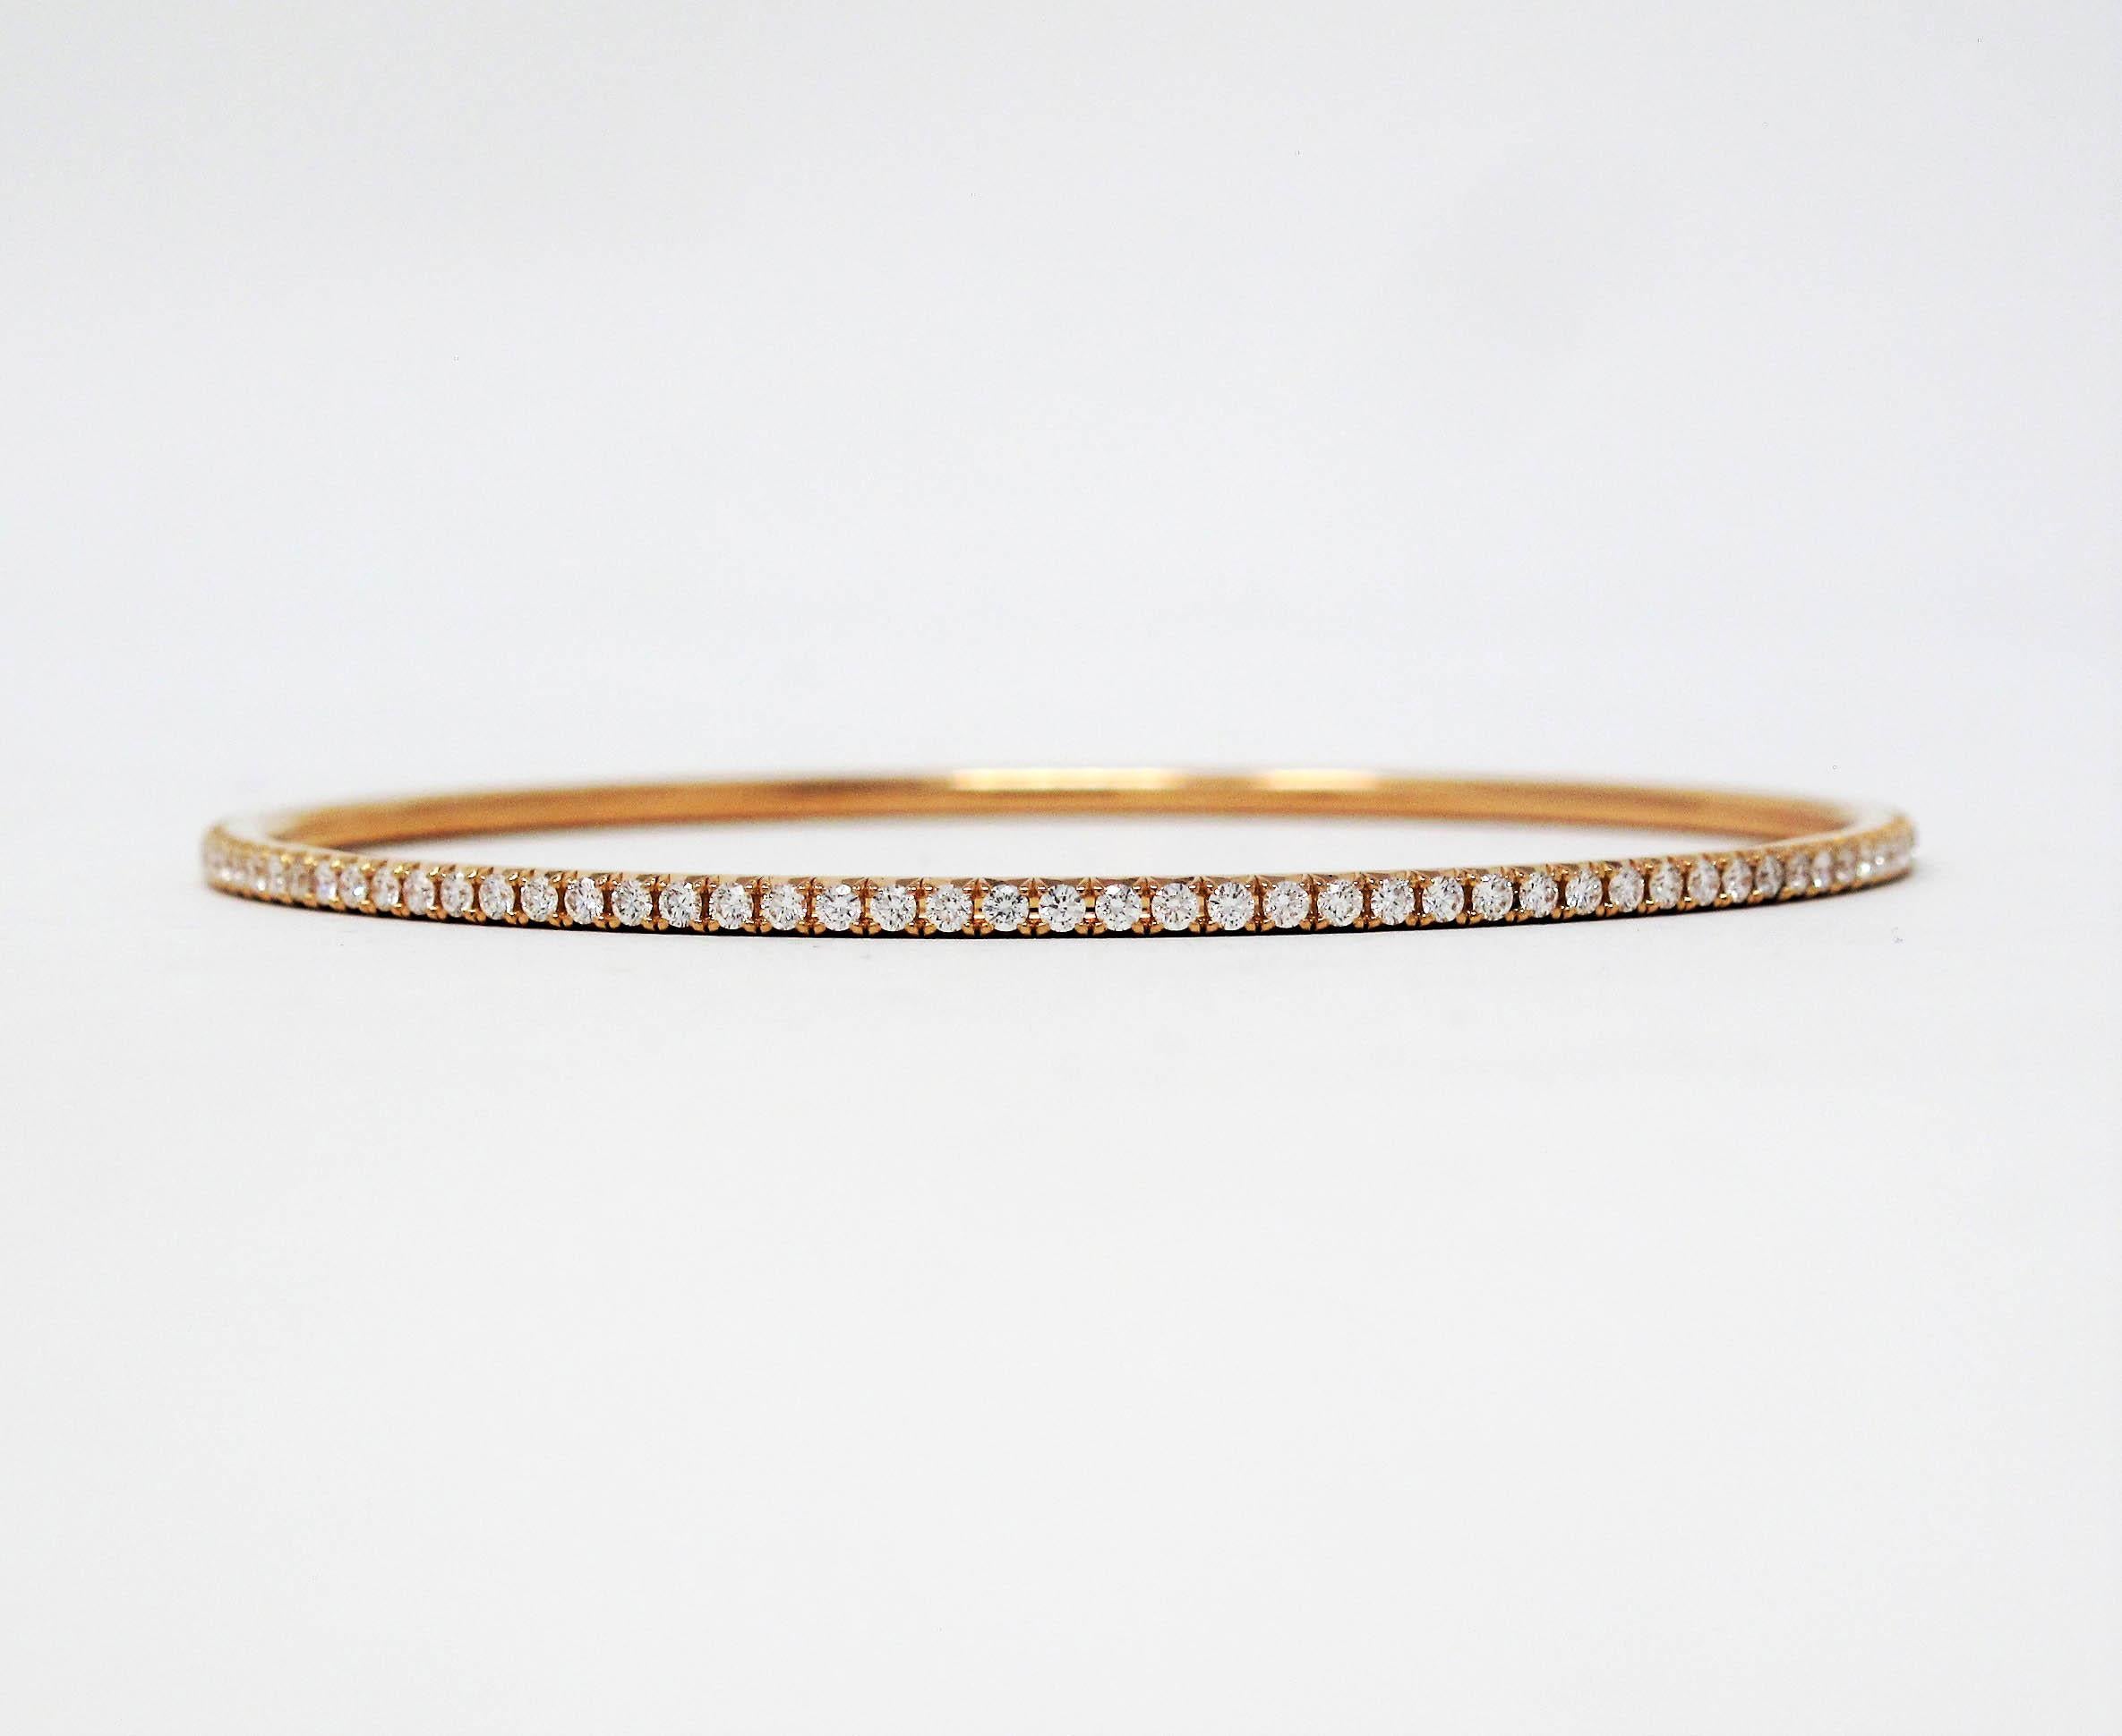 Simple yet stunning Metro diamond eternity bracelet by famed jeweler, Tiffany & Co. This delicate paved bangle bracelet boasts an ultra feminine feel, while the sleek simplicity gives it a modern elegance. The Metro collection is known for its